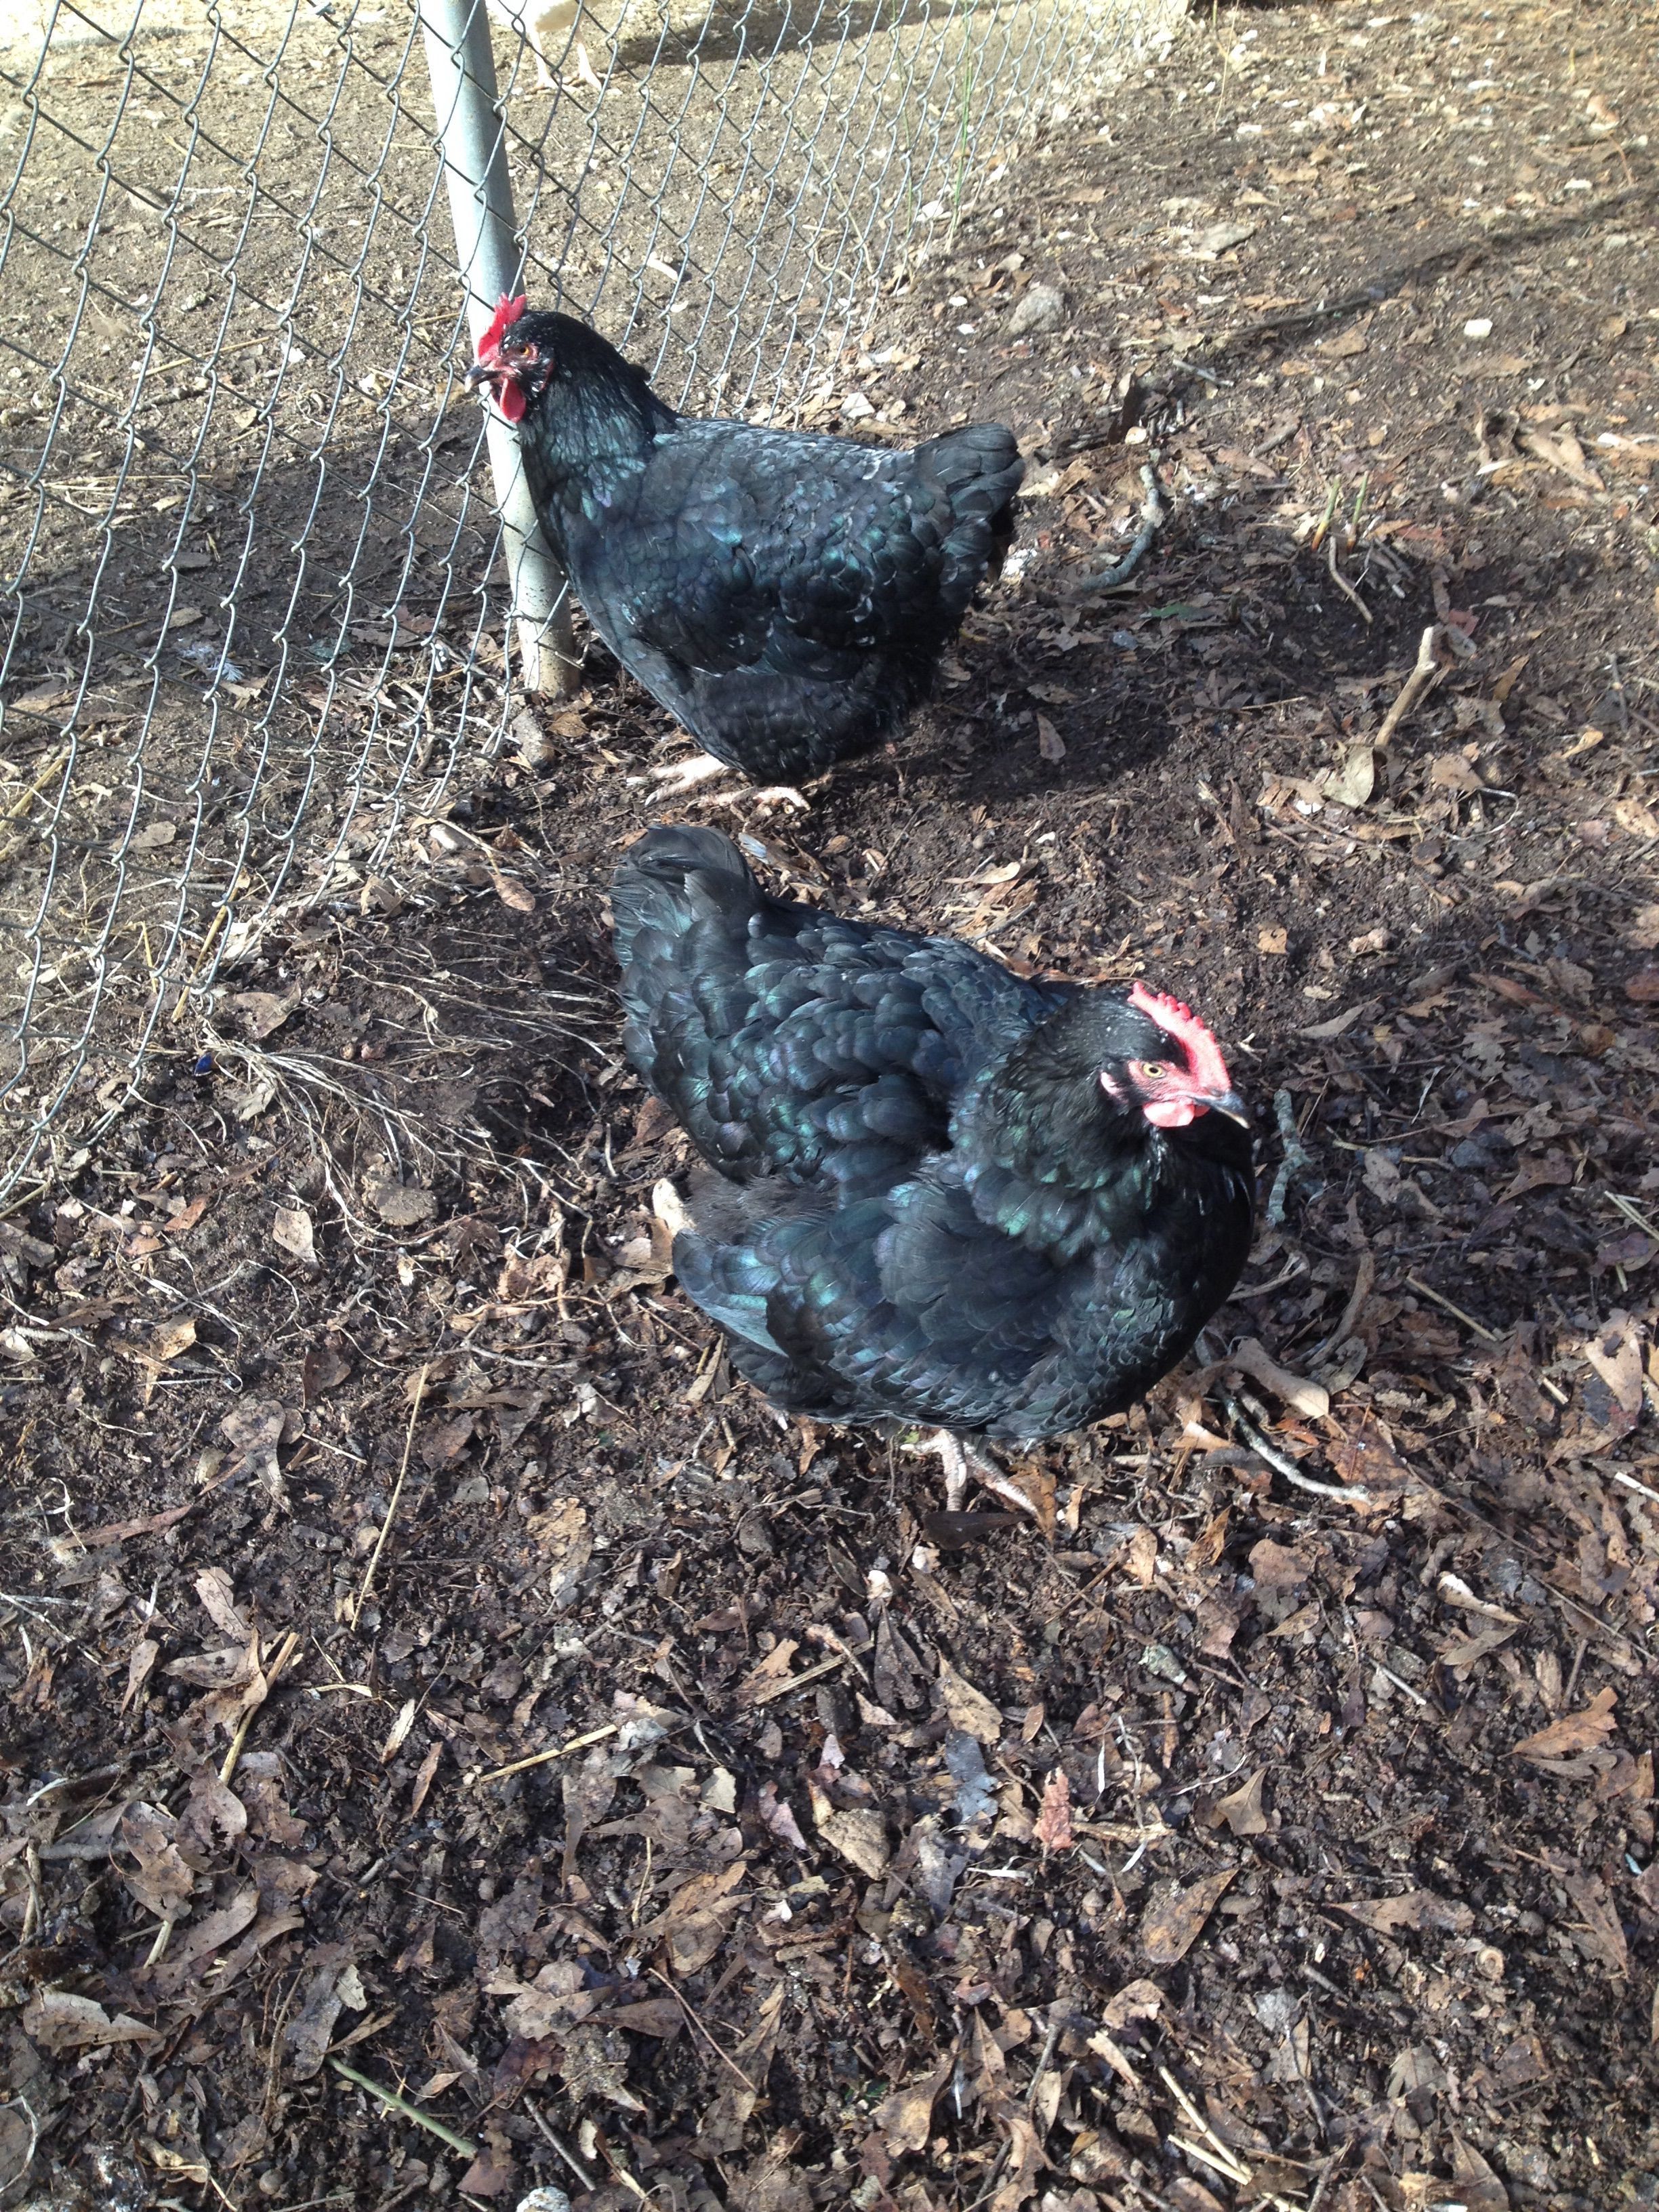 My two Austrolorp hens